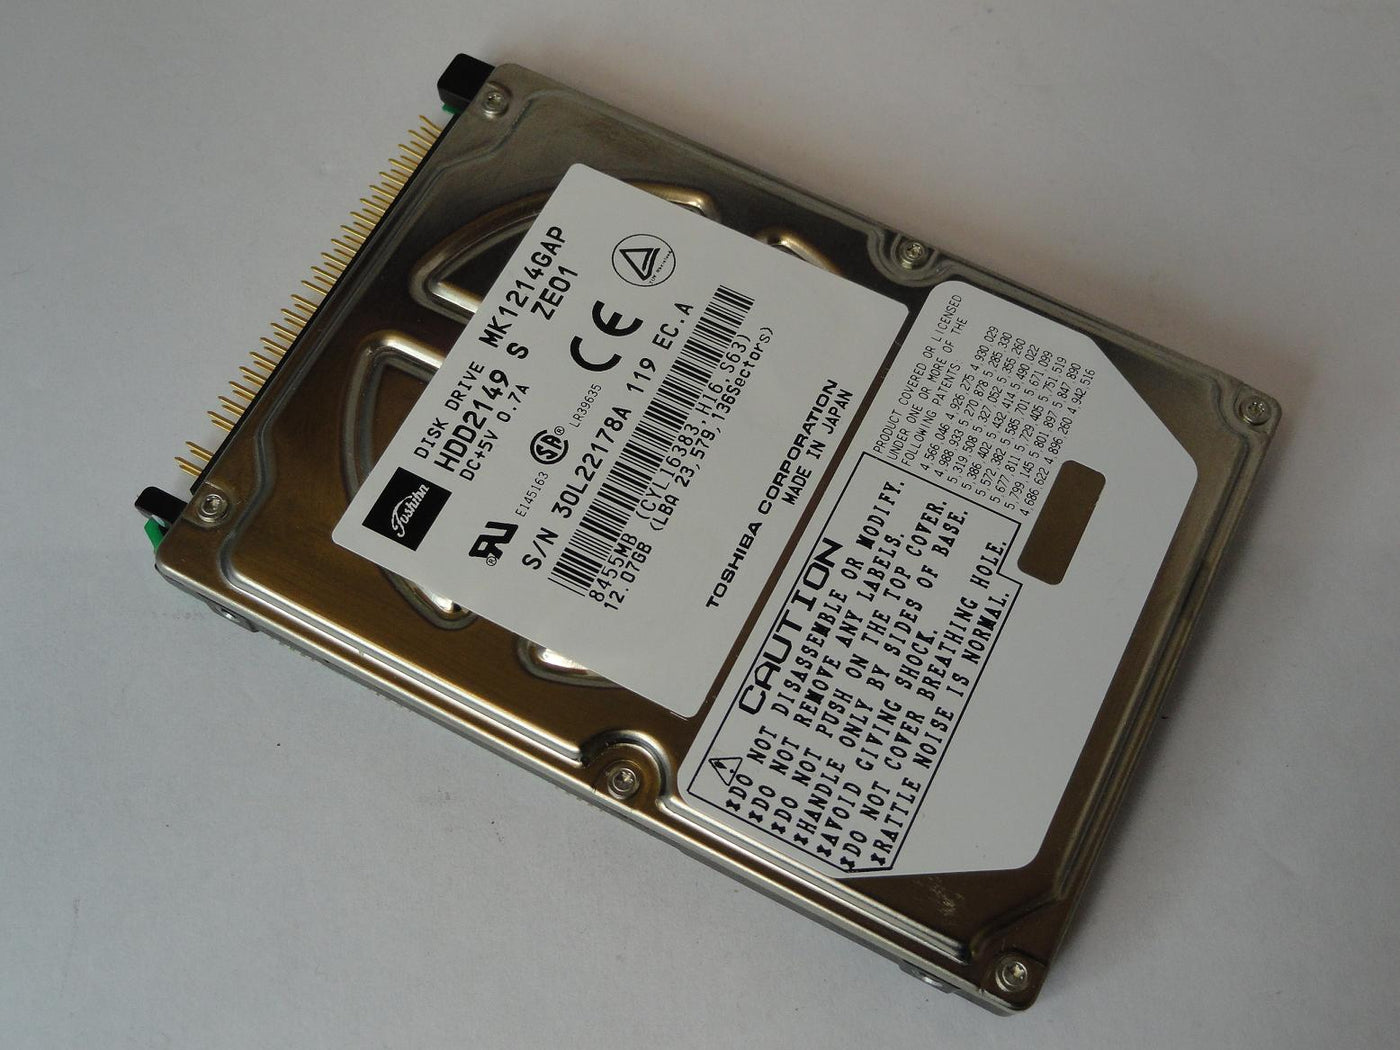 HDD2149 - Toshiba 12Gb IDE 4200rpm 2.5in Laptop HDD - Refurbished